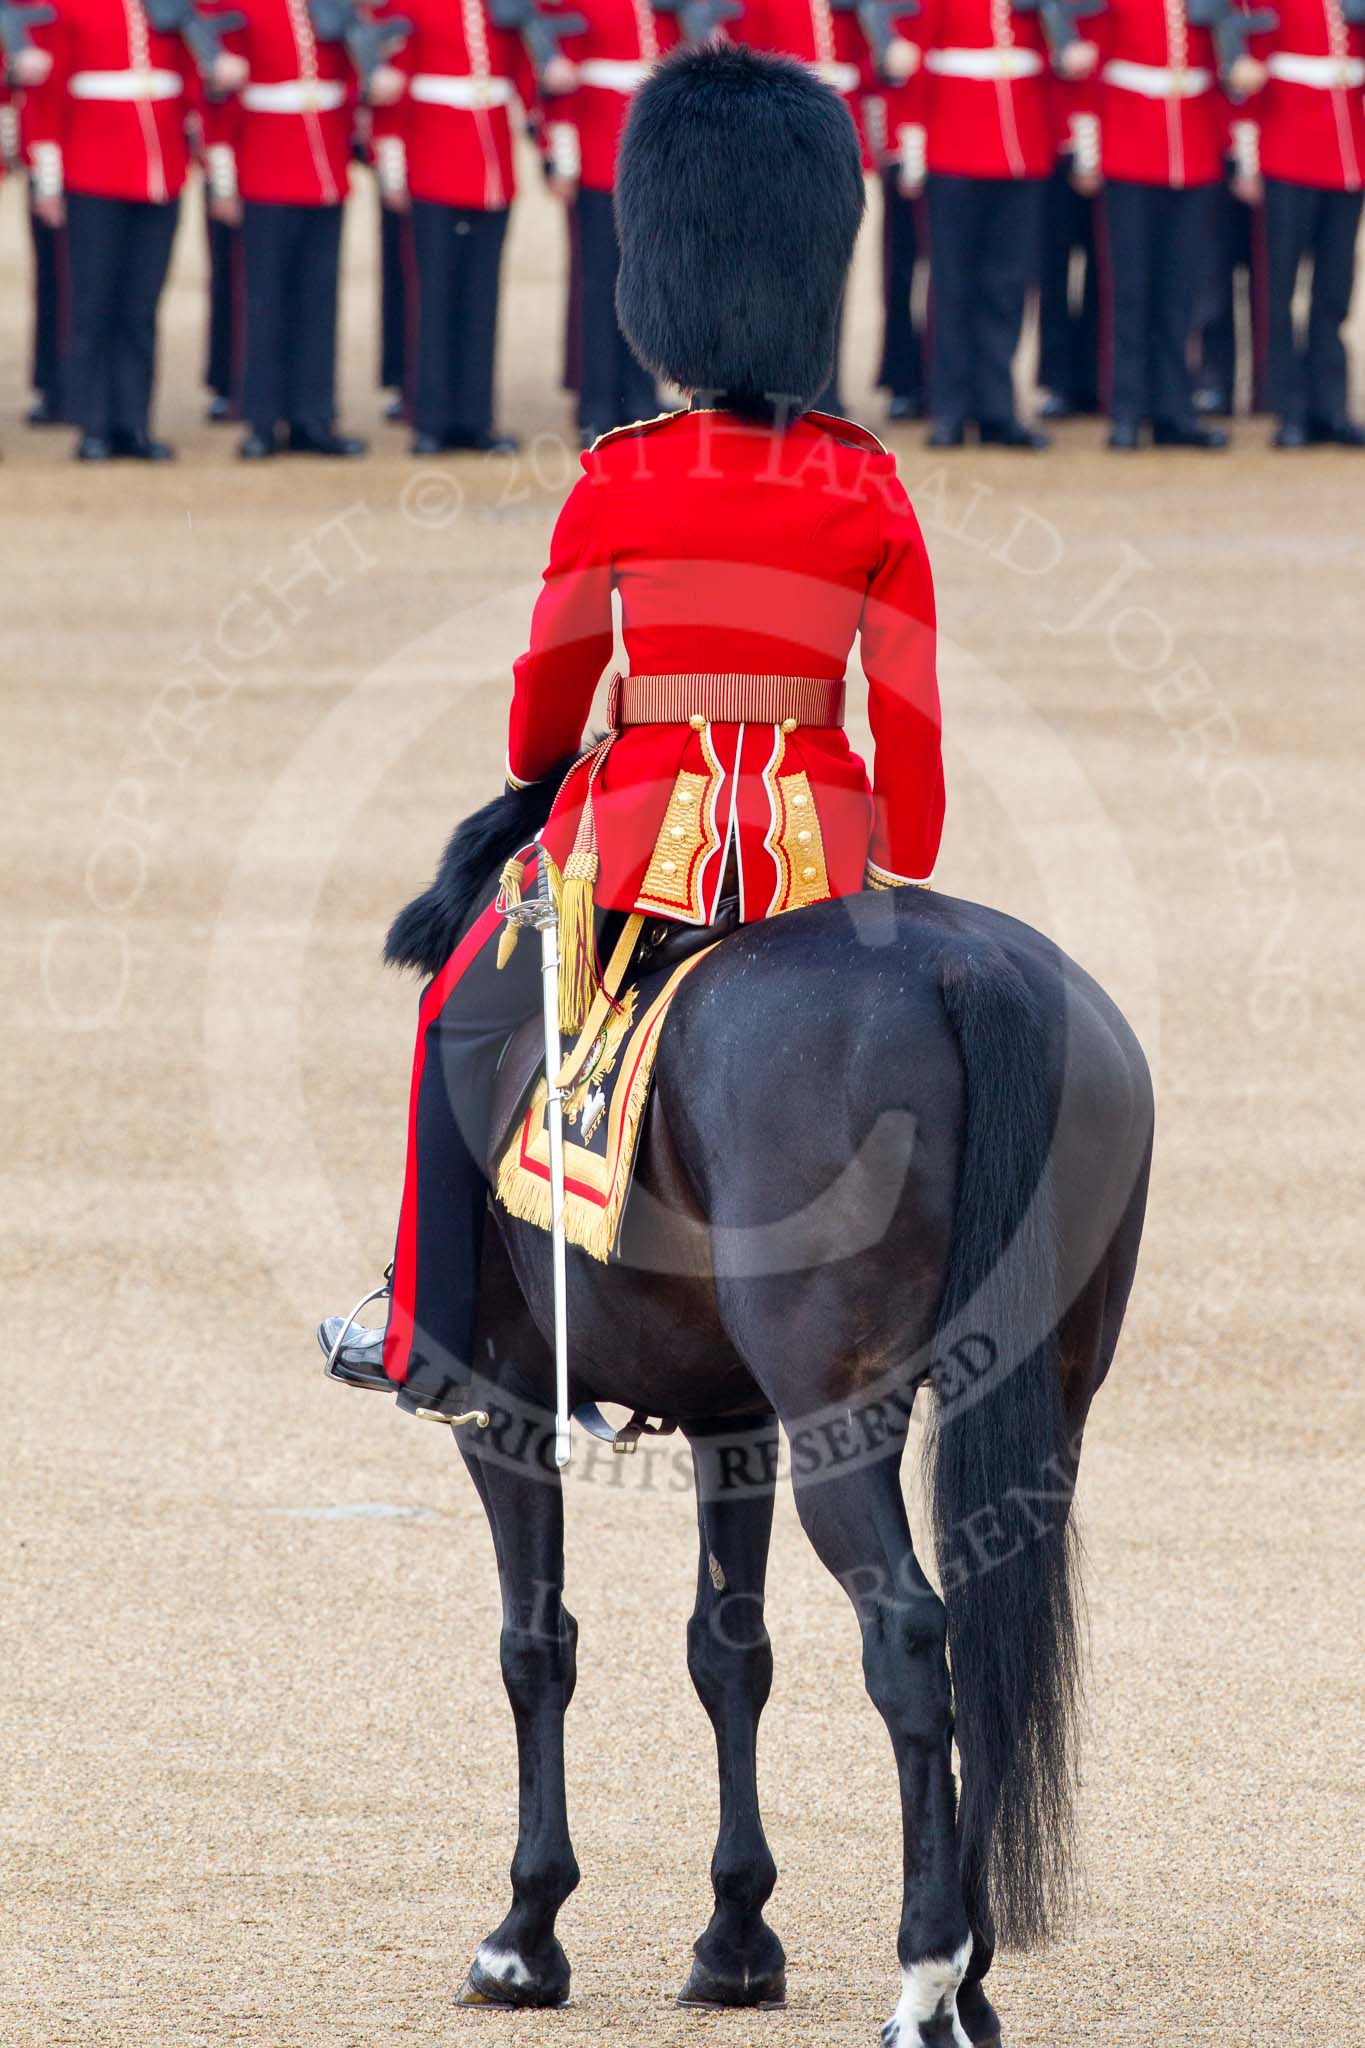 Trooping the Colour 2011: The Adjutant of the Parade, Captain Hamish Barne, 1st Battalion Scots. Guards..
Horse Guards Parade, Westminster,
London SW1,
Greater London,
United Kingdom,
on 11 June 2011 at 10:36, image #59